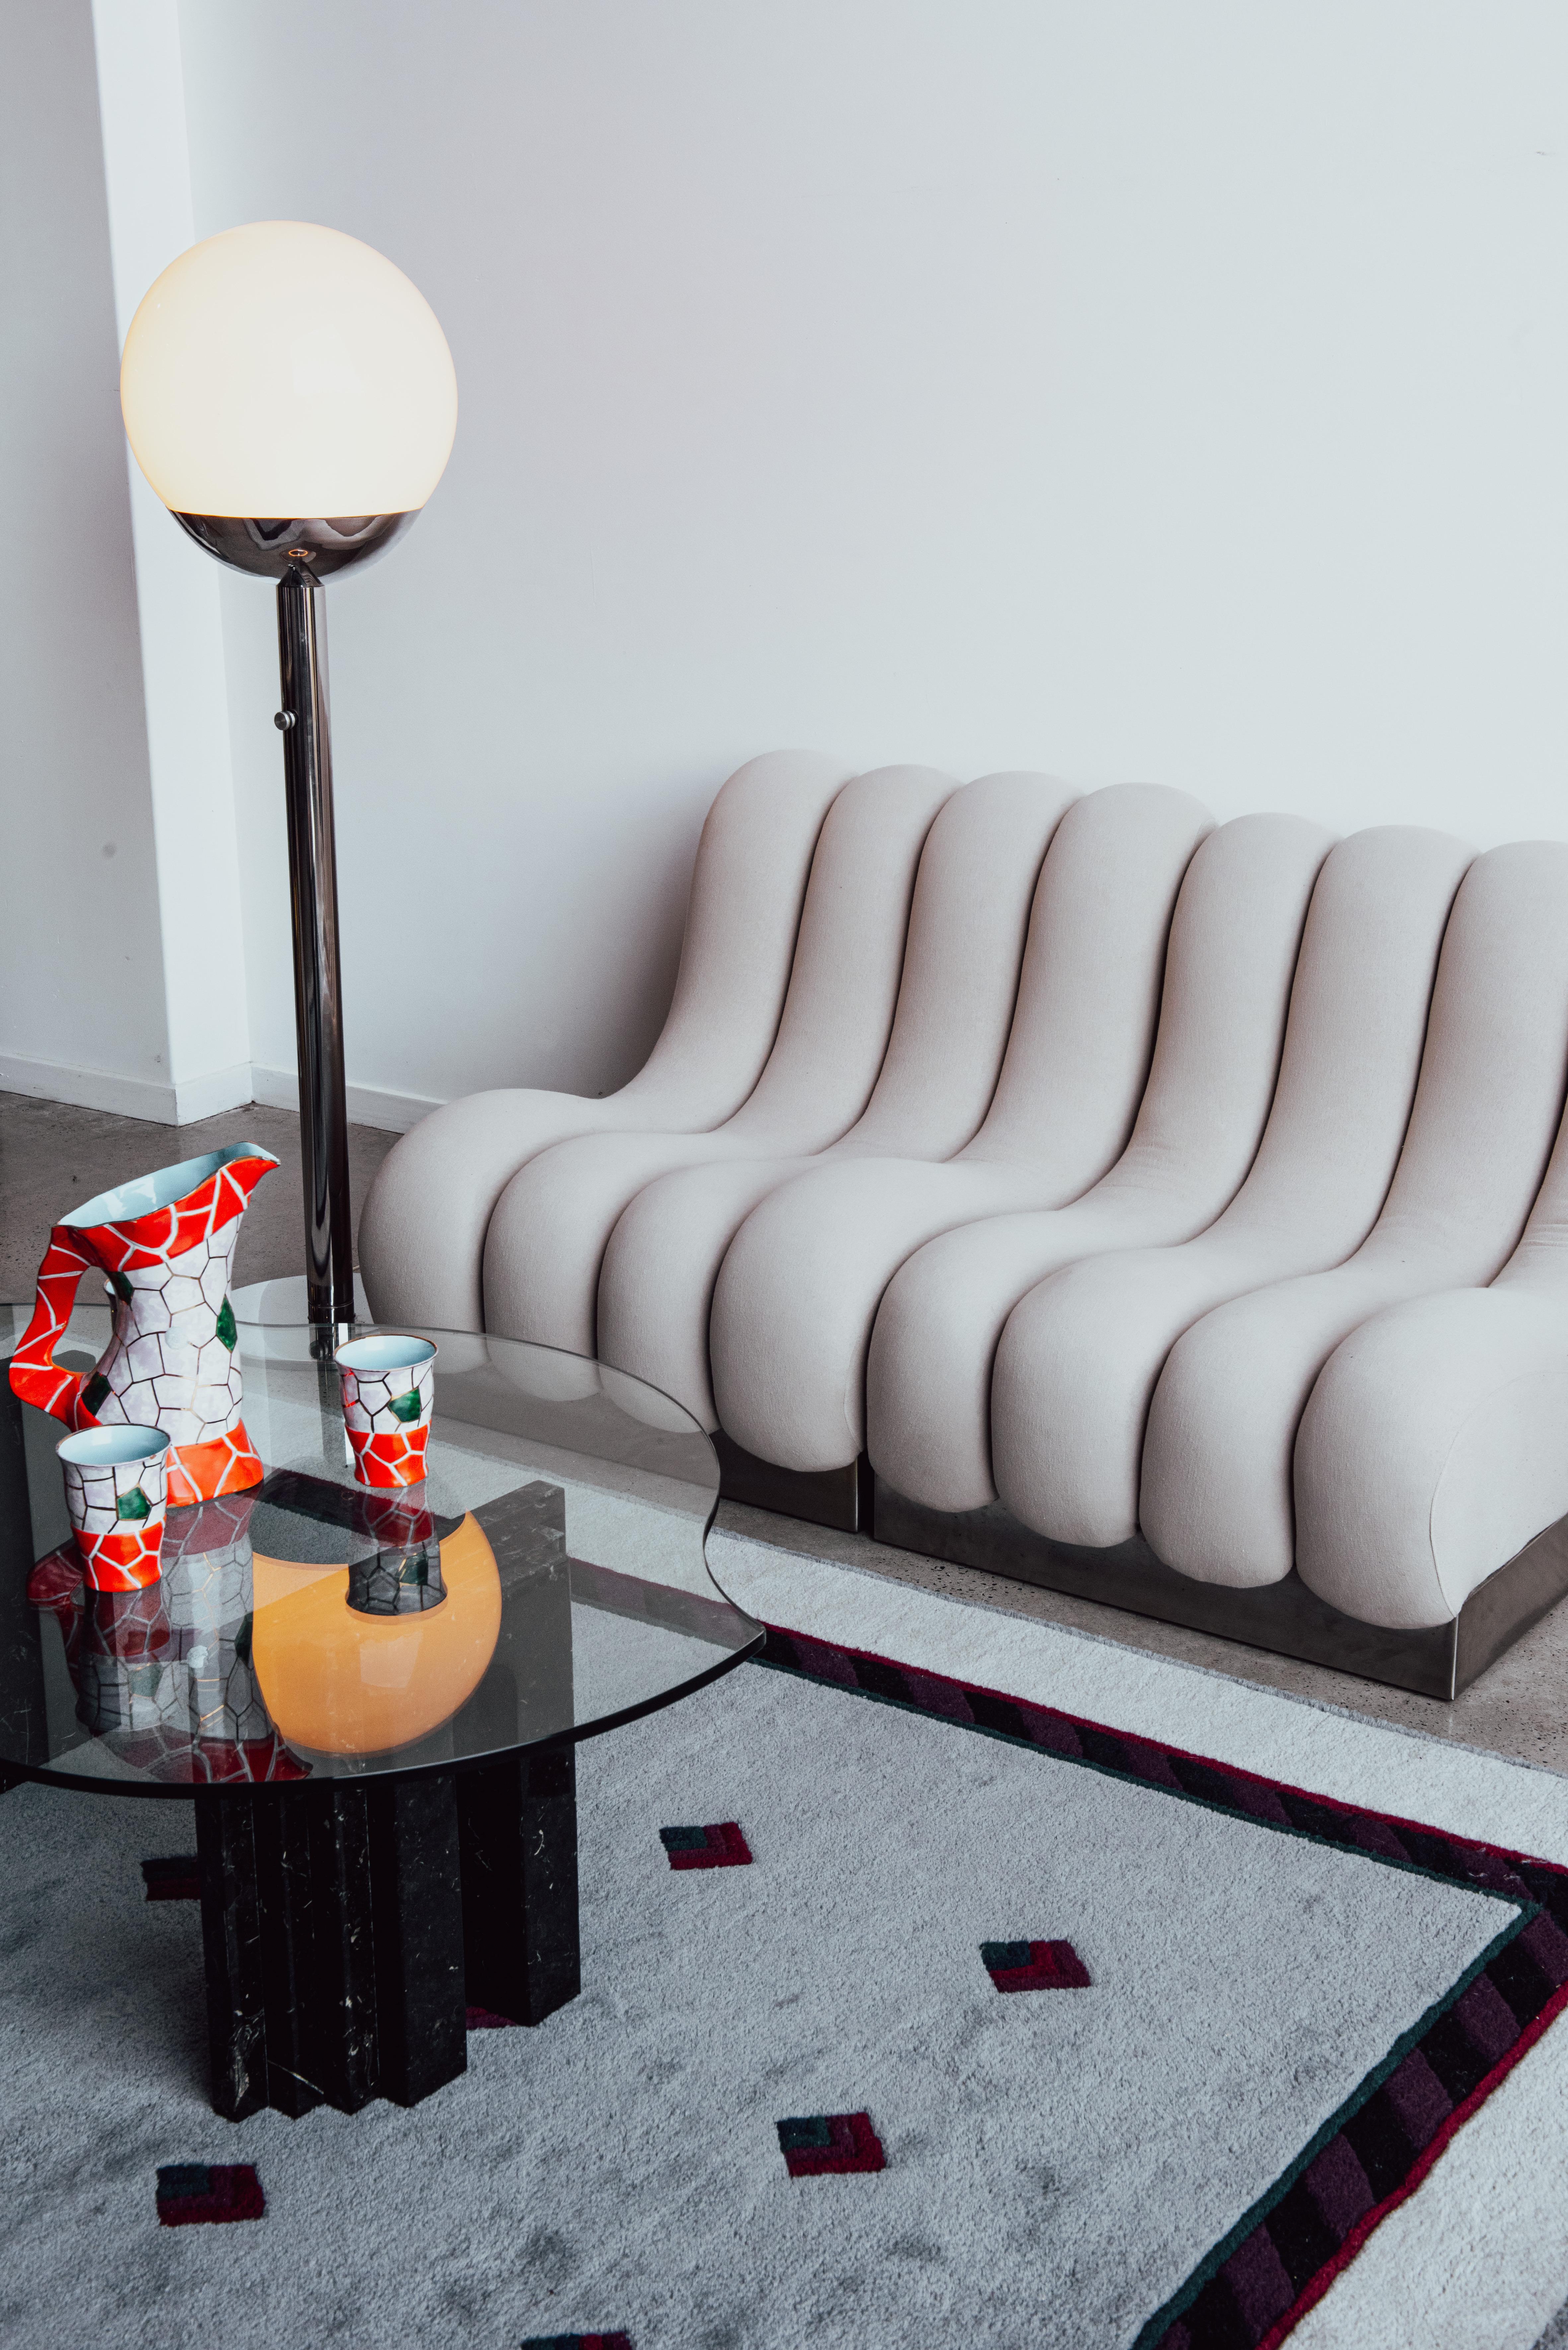 Mid-Century Modern Italian Modular sofa chairs in cream fabric and metal base 1970s.
Stunning armchairs low seat modular sofas, both chairs are professional reupholstered in beautiful Italian cream fabric.
The square metal base gives a really